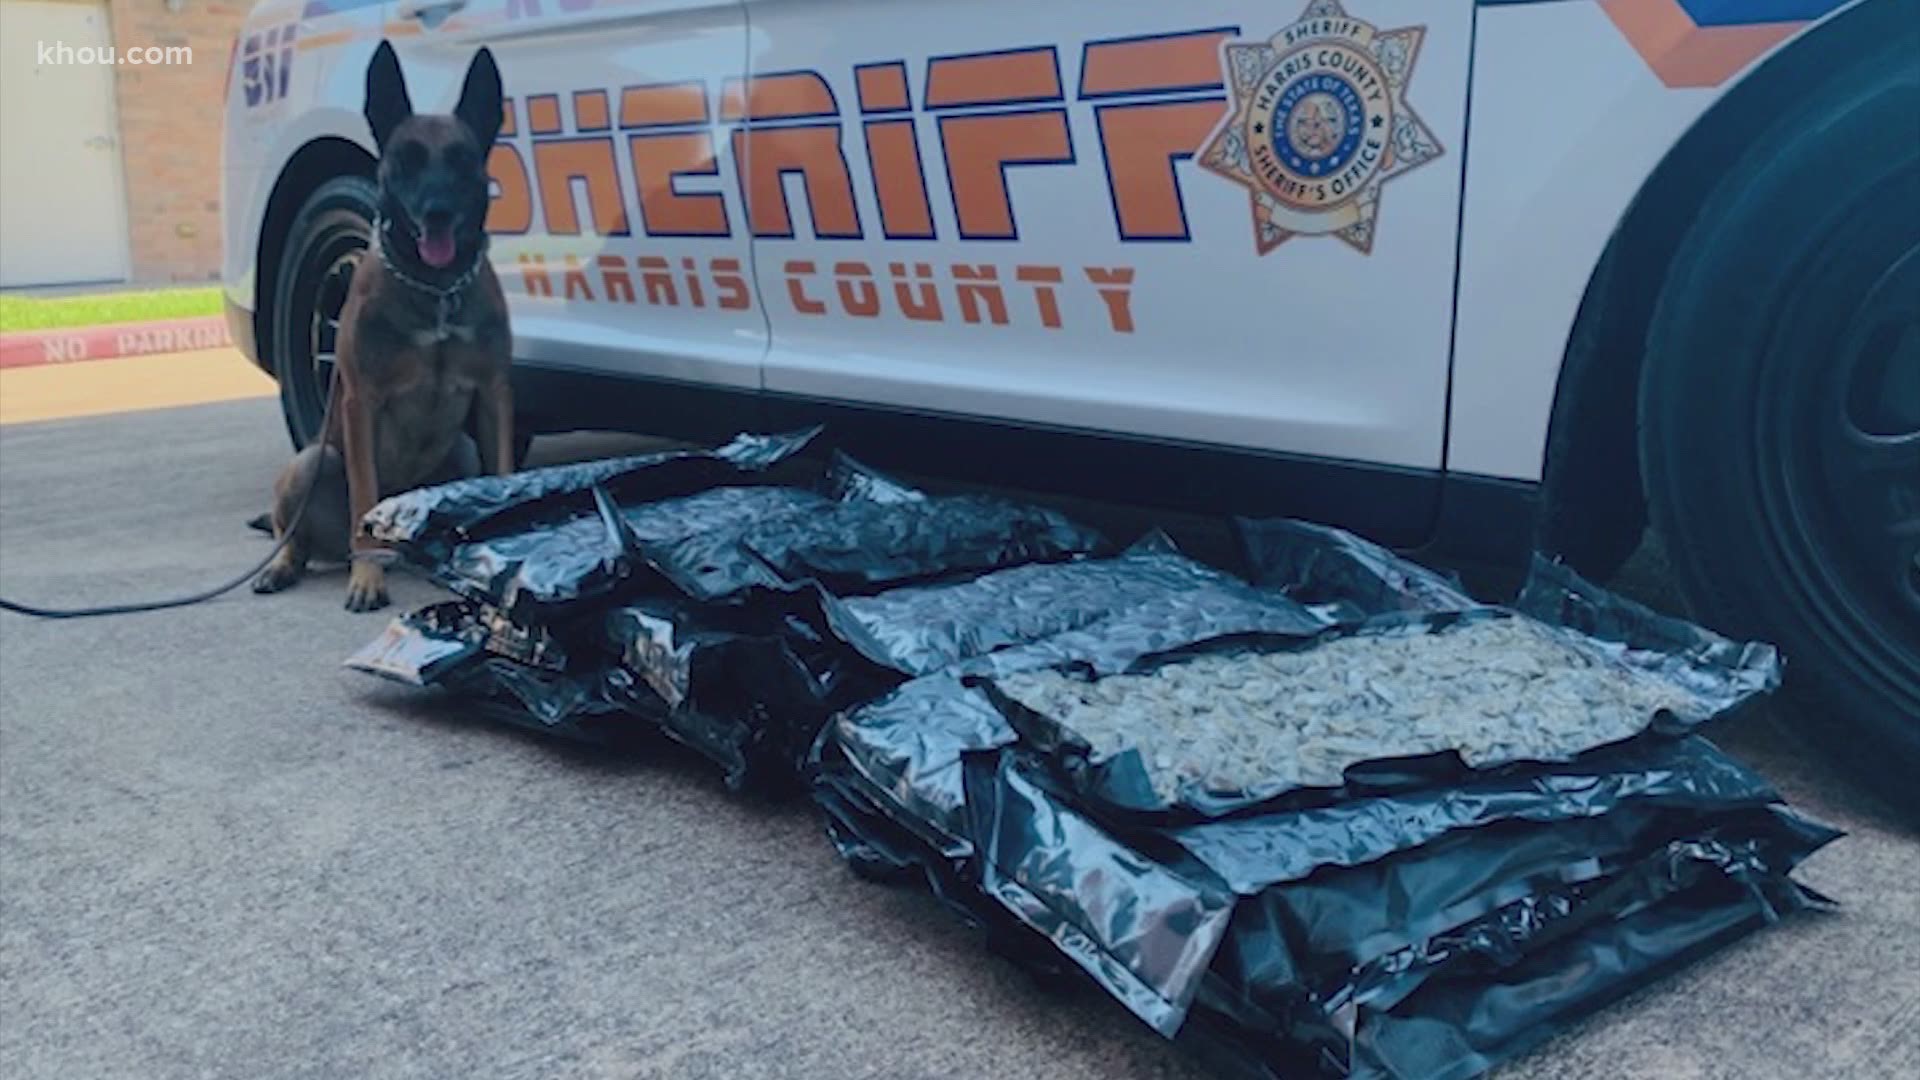 Thirty-two bags of marijuana are now in the custody of Harris County deputies after being mailed to the wrong house.